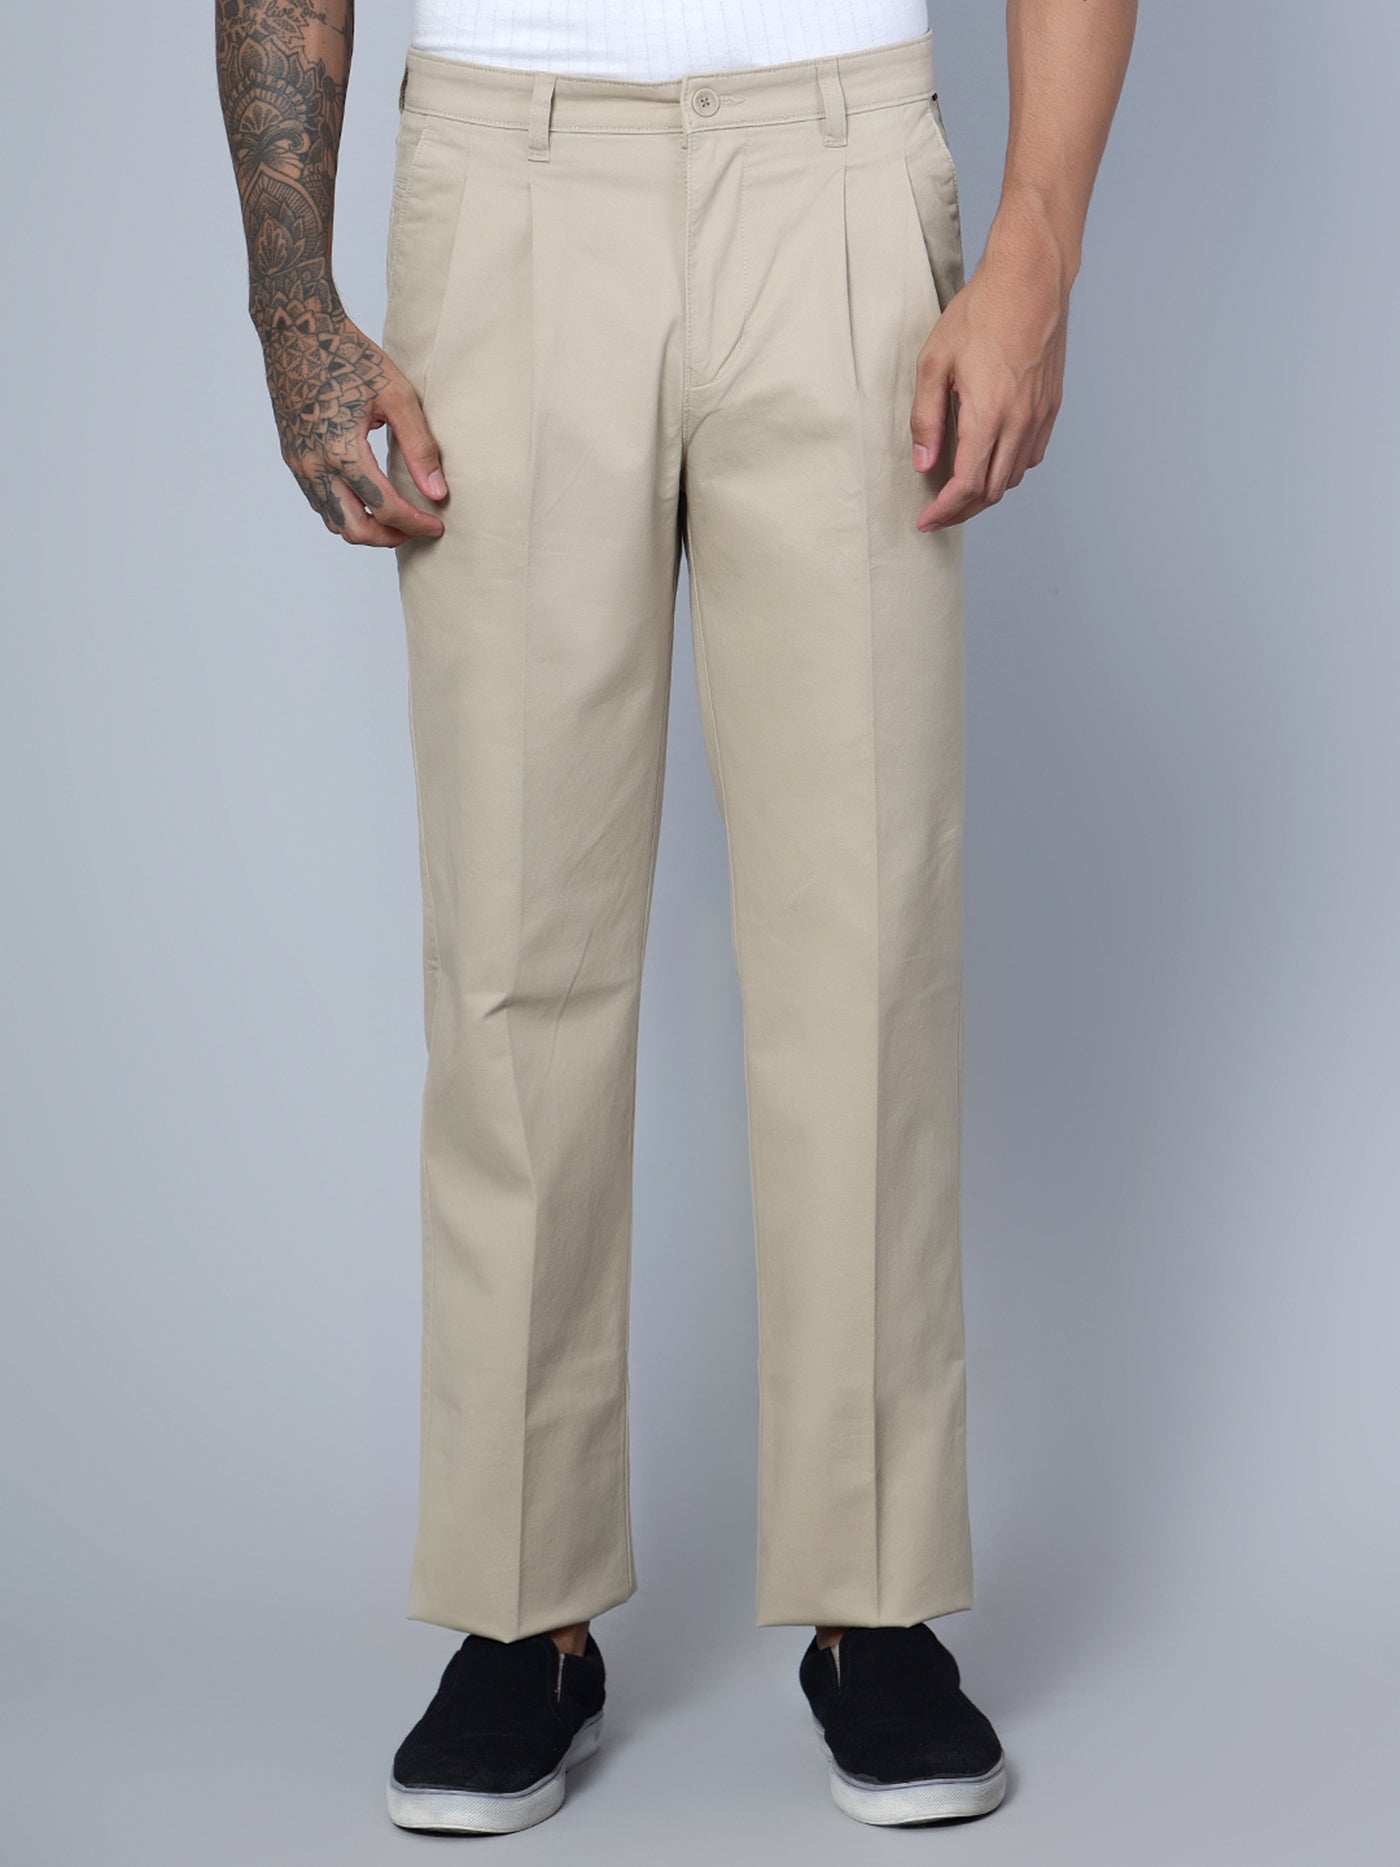 Buy Cantabil Men Beige Cotton Regular Fit Casual Trouser  (MTRC00077_Fawn_30) at Amazon.in